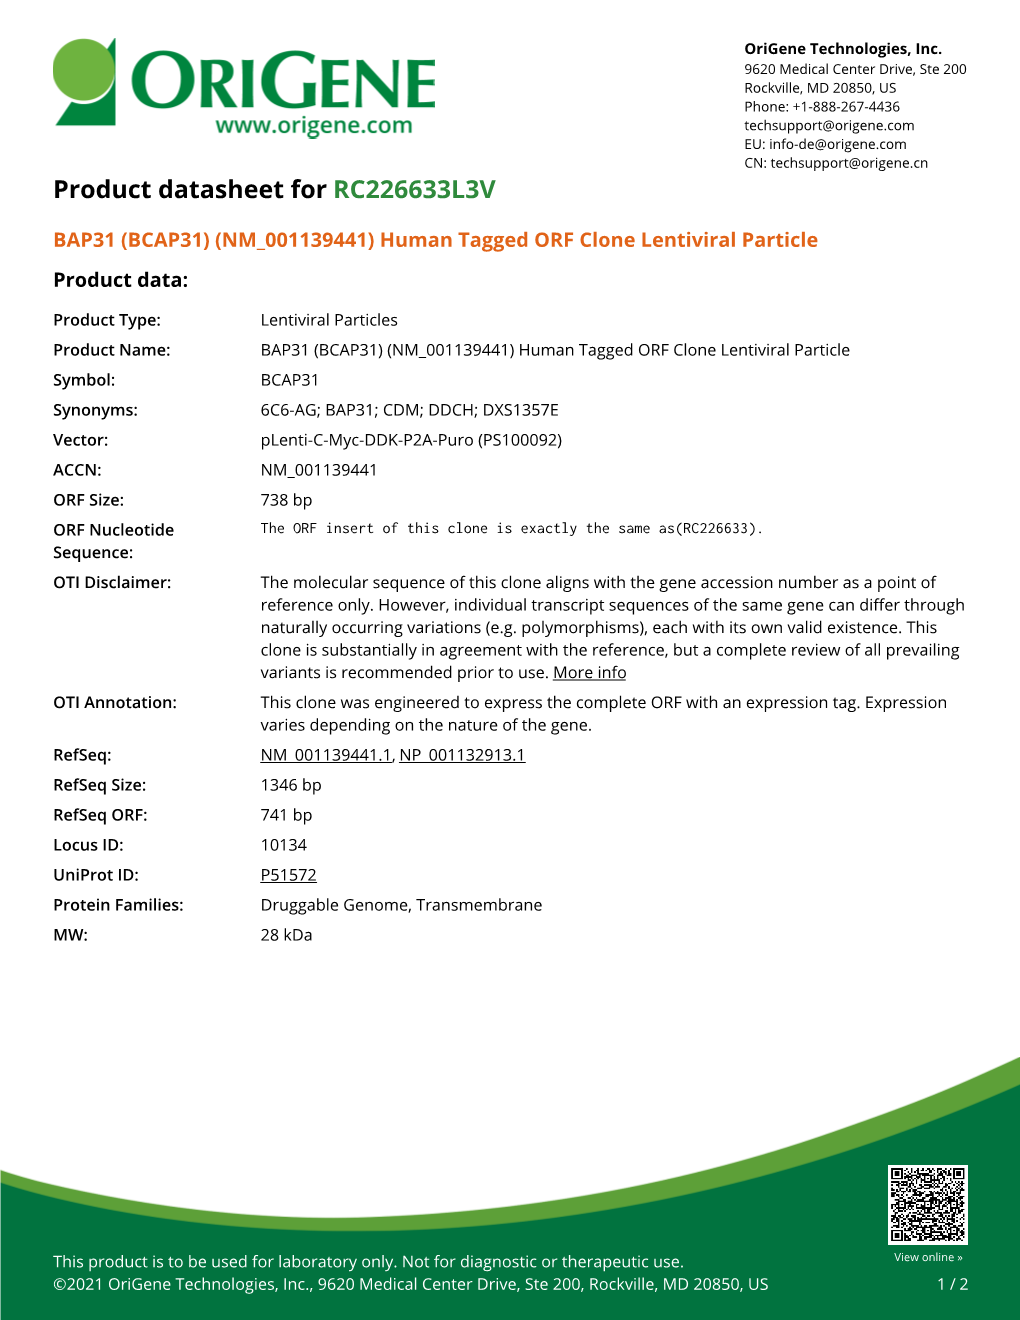 (BCAP31) (NM 001139441) Human Tagged ORF Clone Lentiviral Particle Product Data